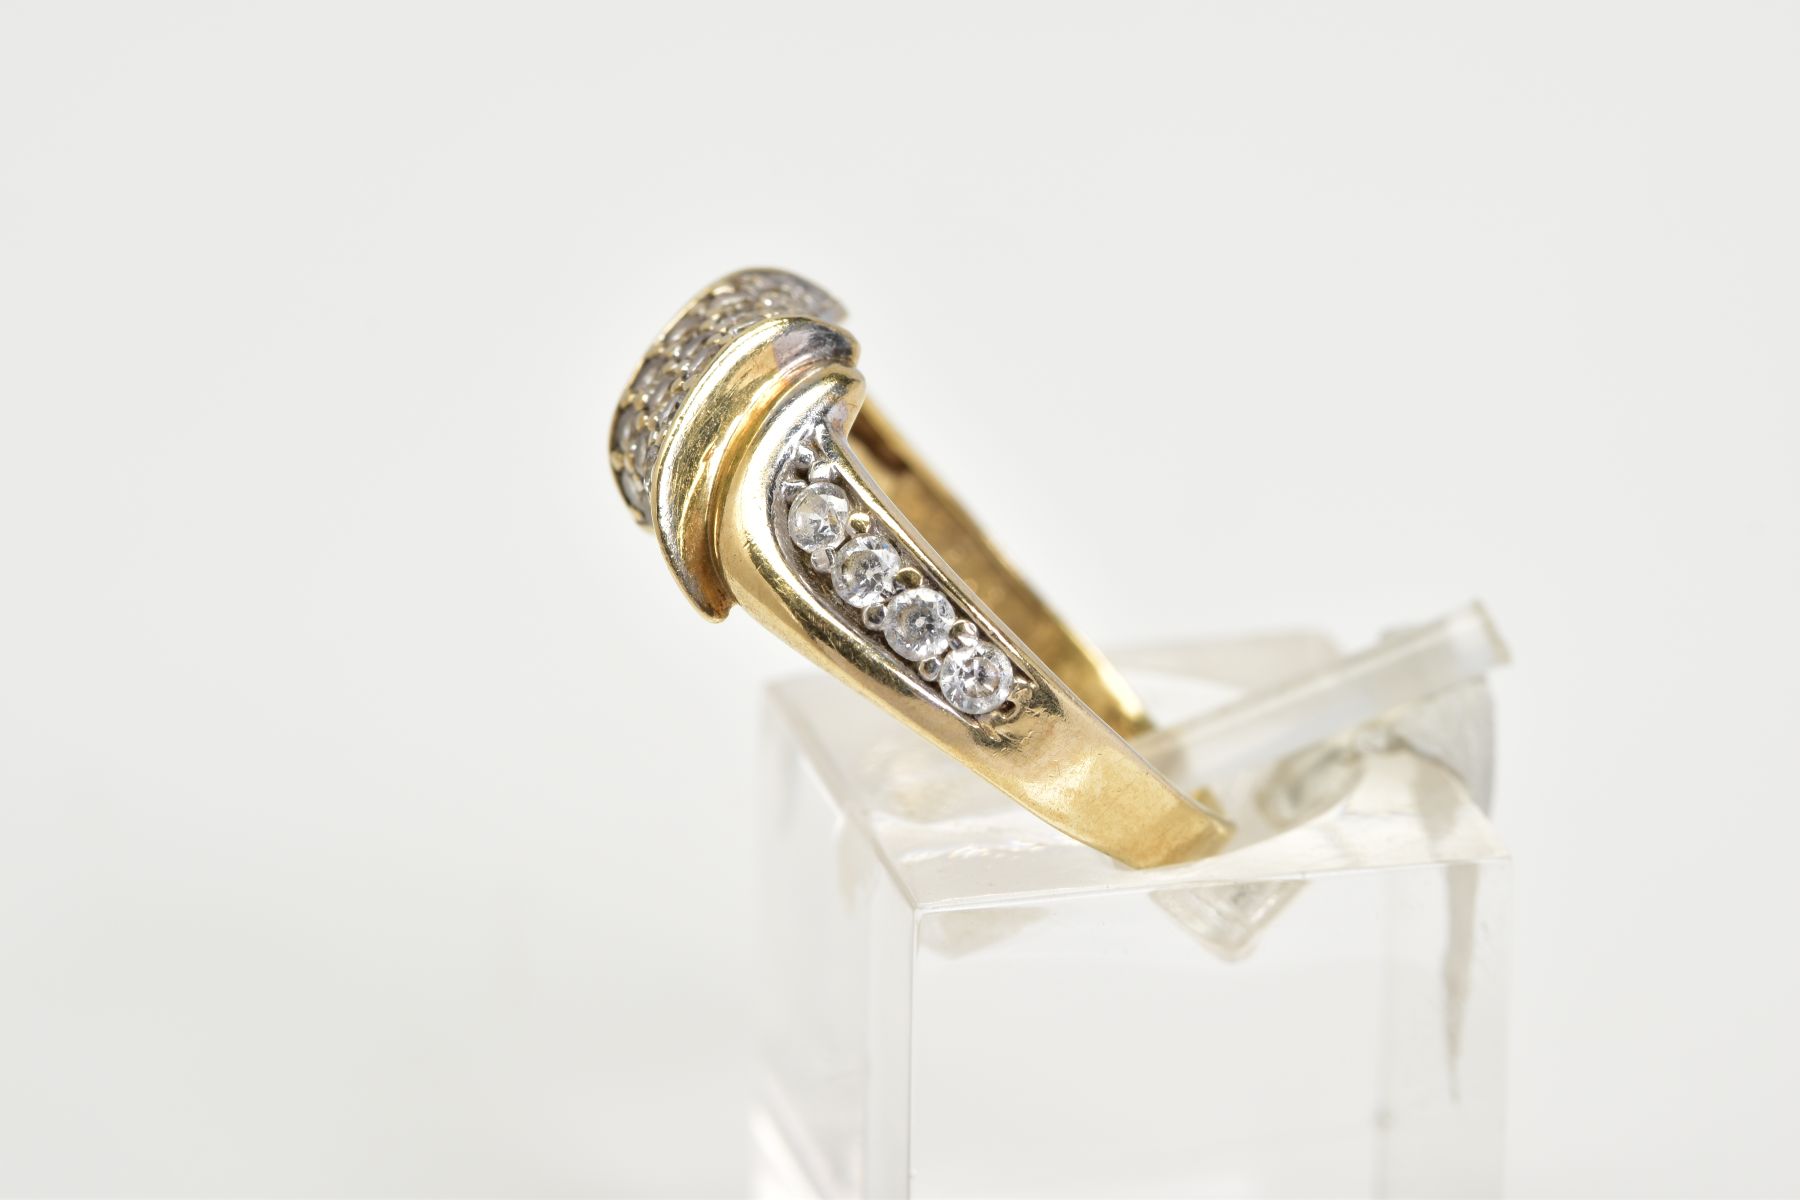 A 9CT GOLD DIAMOND RING, designed with an asymmetrical panel set with round brilliant cut - Image 2 of 3